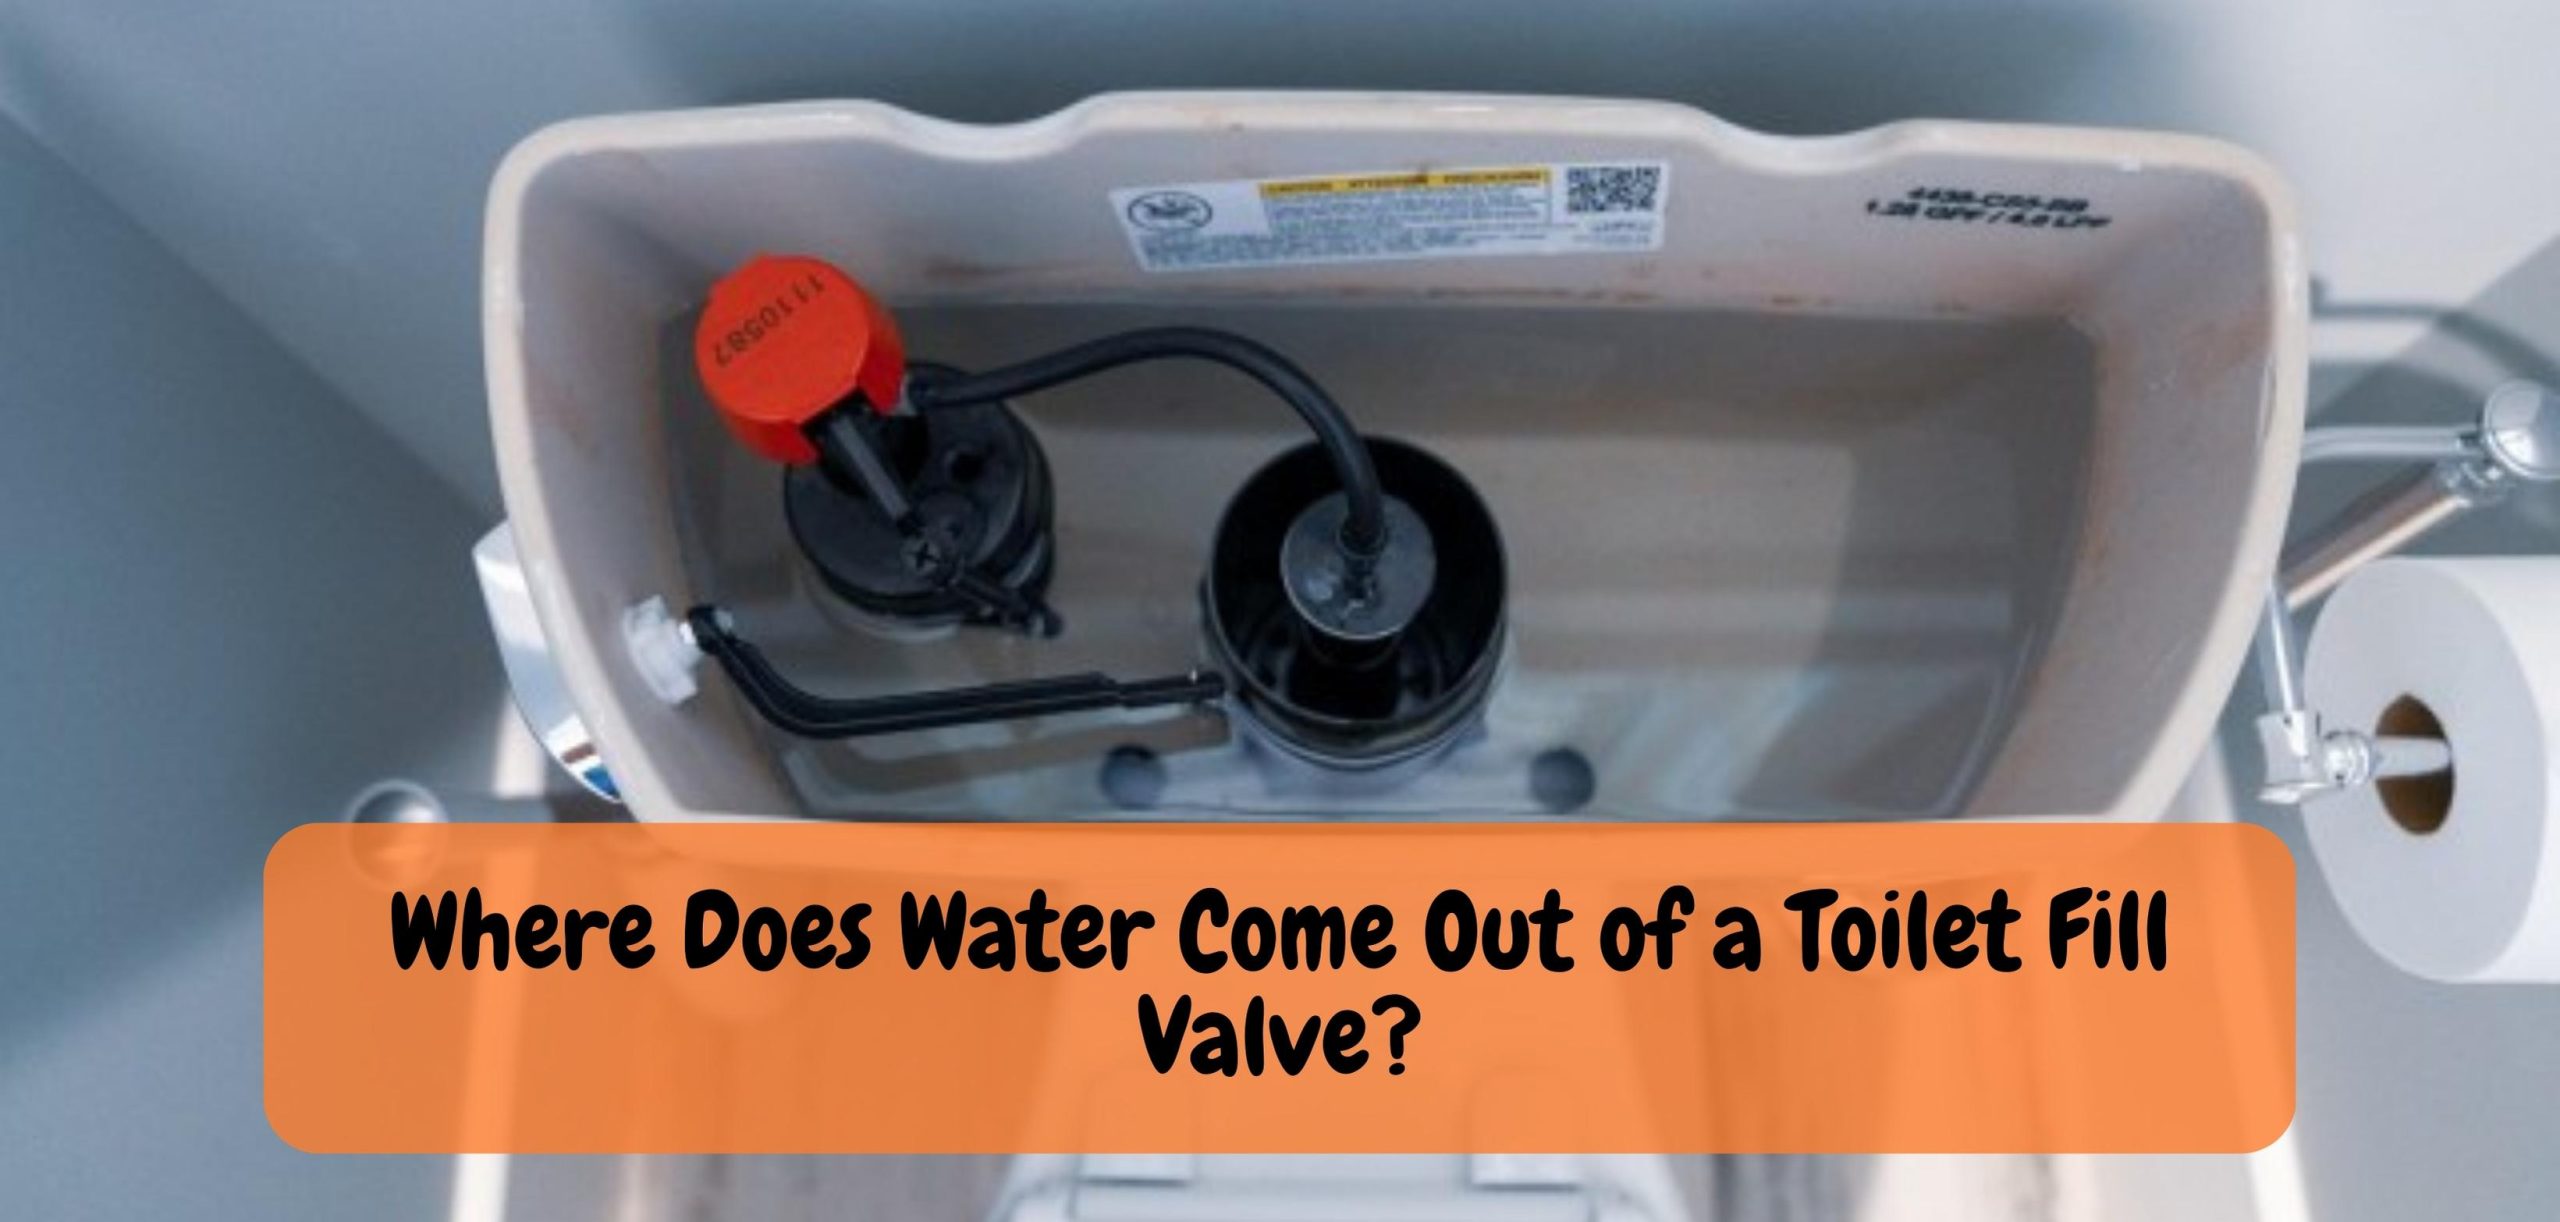 Where Does Water Come Out of a Toilet Fill Valve